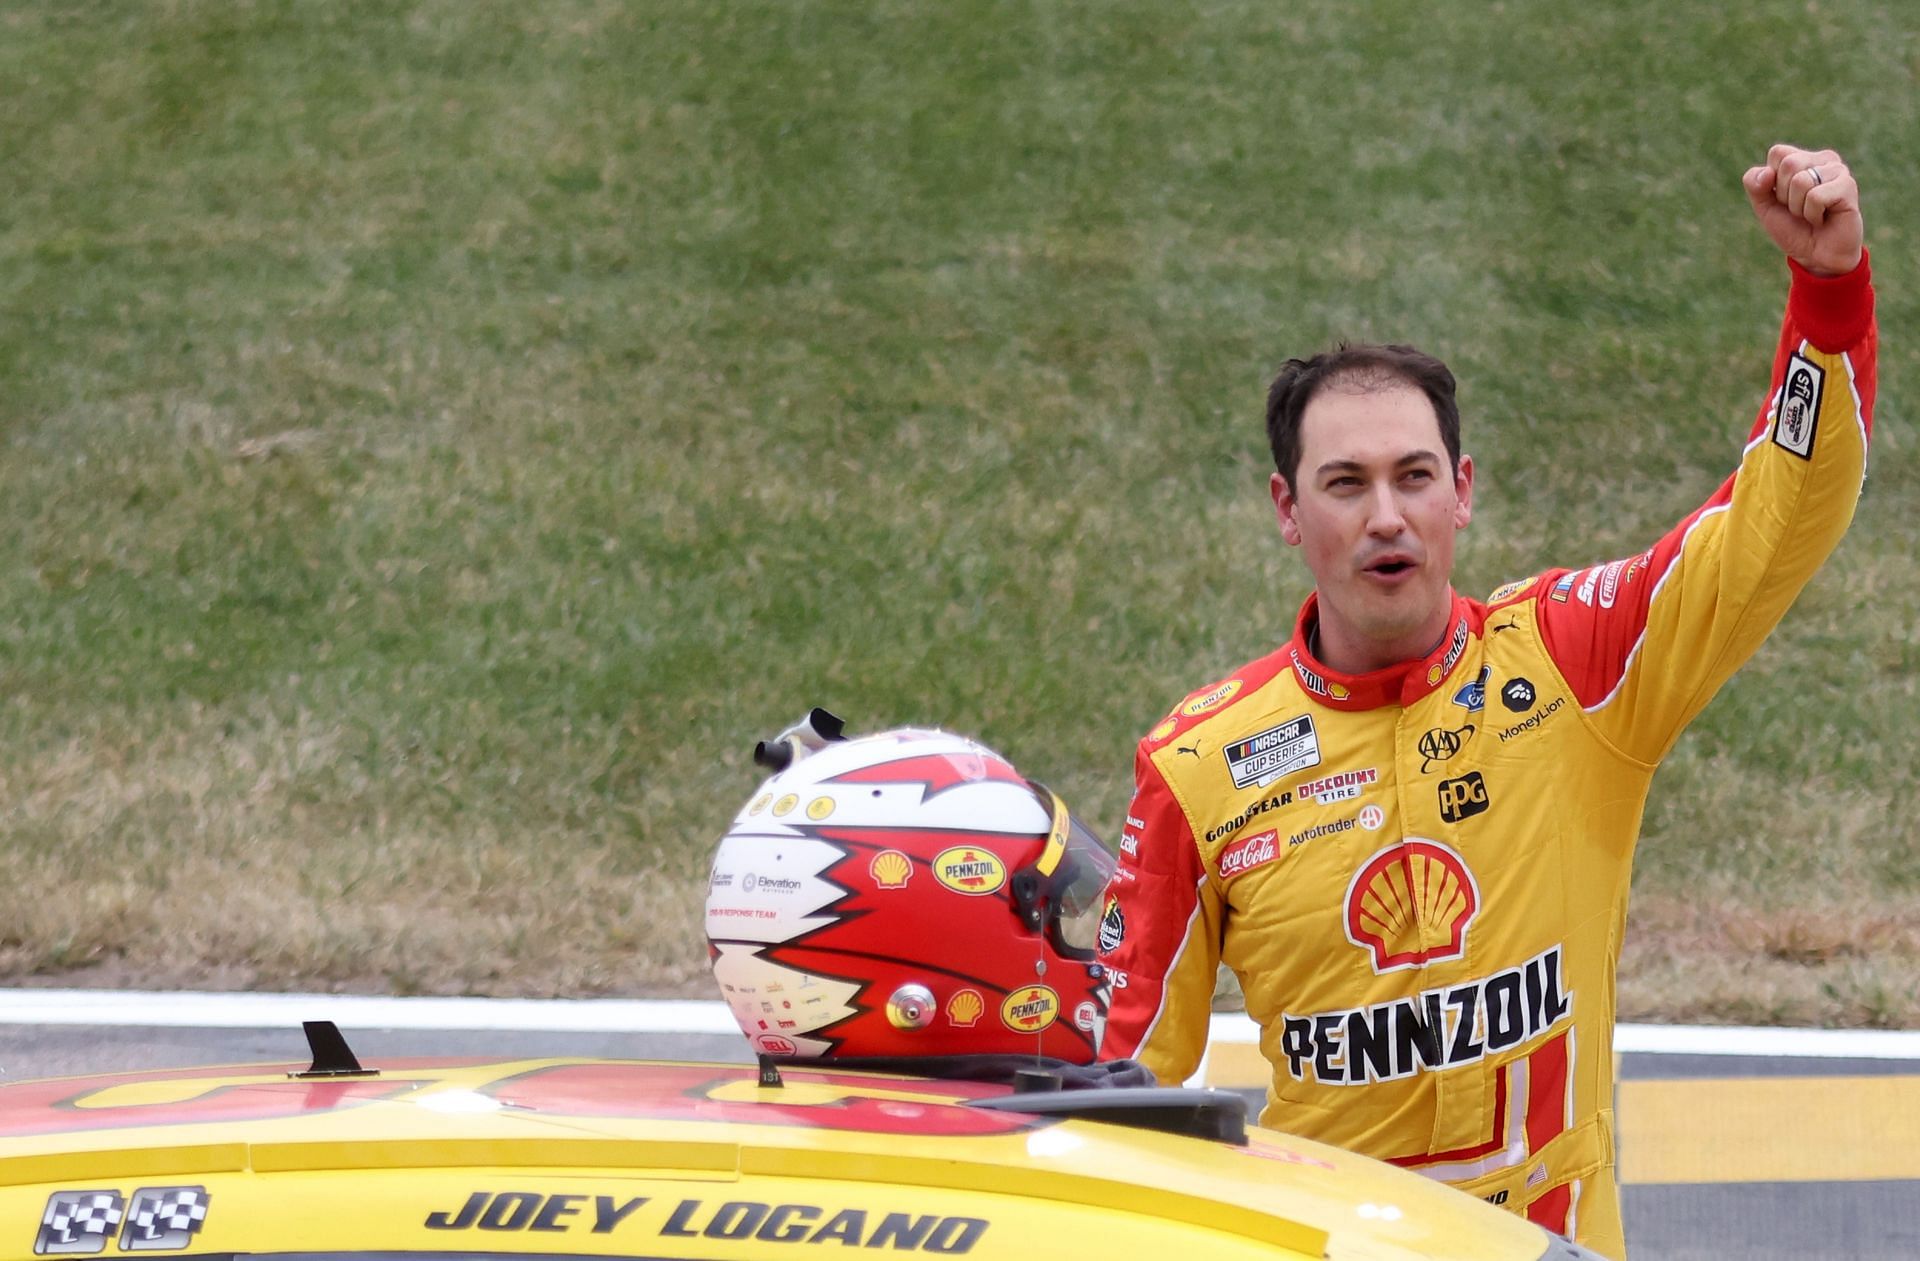 Joey Logano celebrates after winning the 2020 Hollywood Casino 400 at Kansas Speedway, however, oddsmakers are not giving him much of a chance to repeat on Sunday, making him just the ninth favorite. (Photo by Jamie Squire/Getty Images)